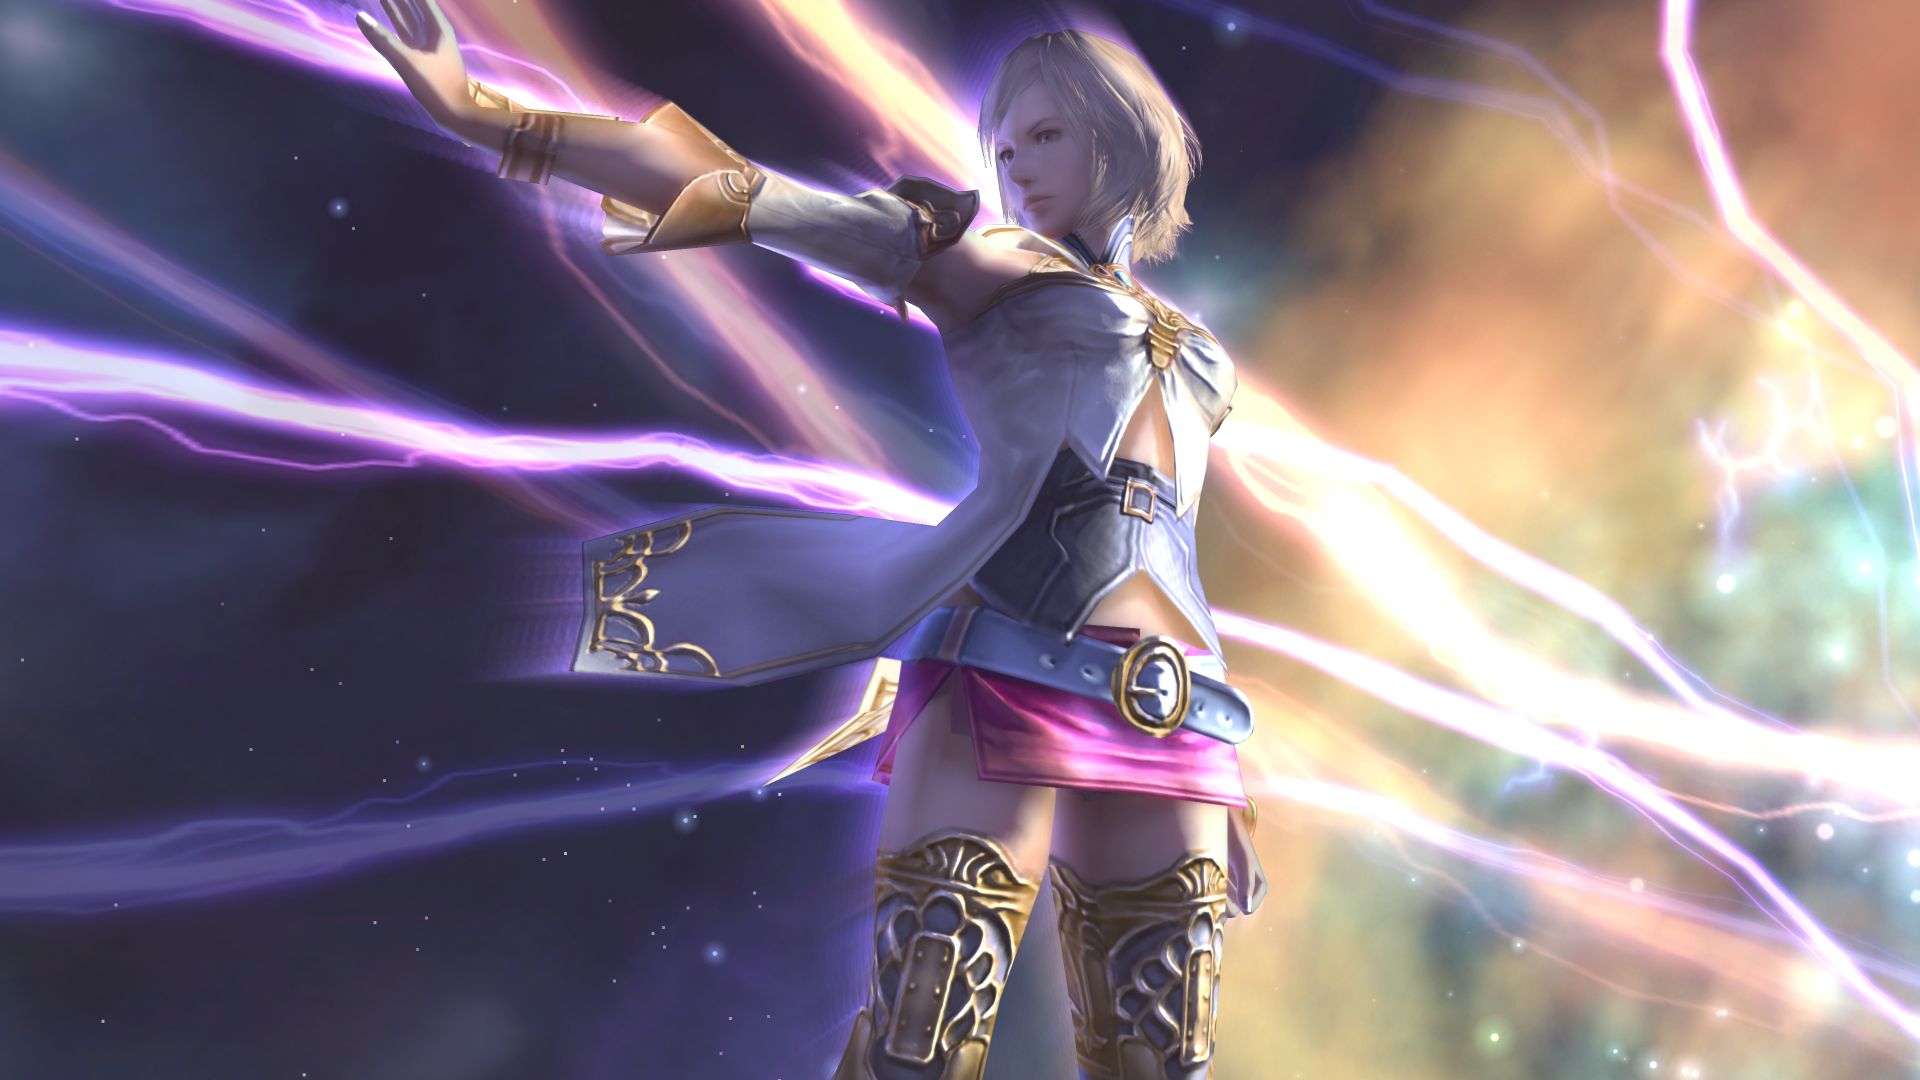 Final Fantasy Xii The Zodiac Age Ps4 And Pc Update Adds Job Reset Function Additional Gambit Sets Siliconera